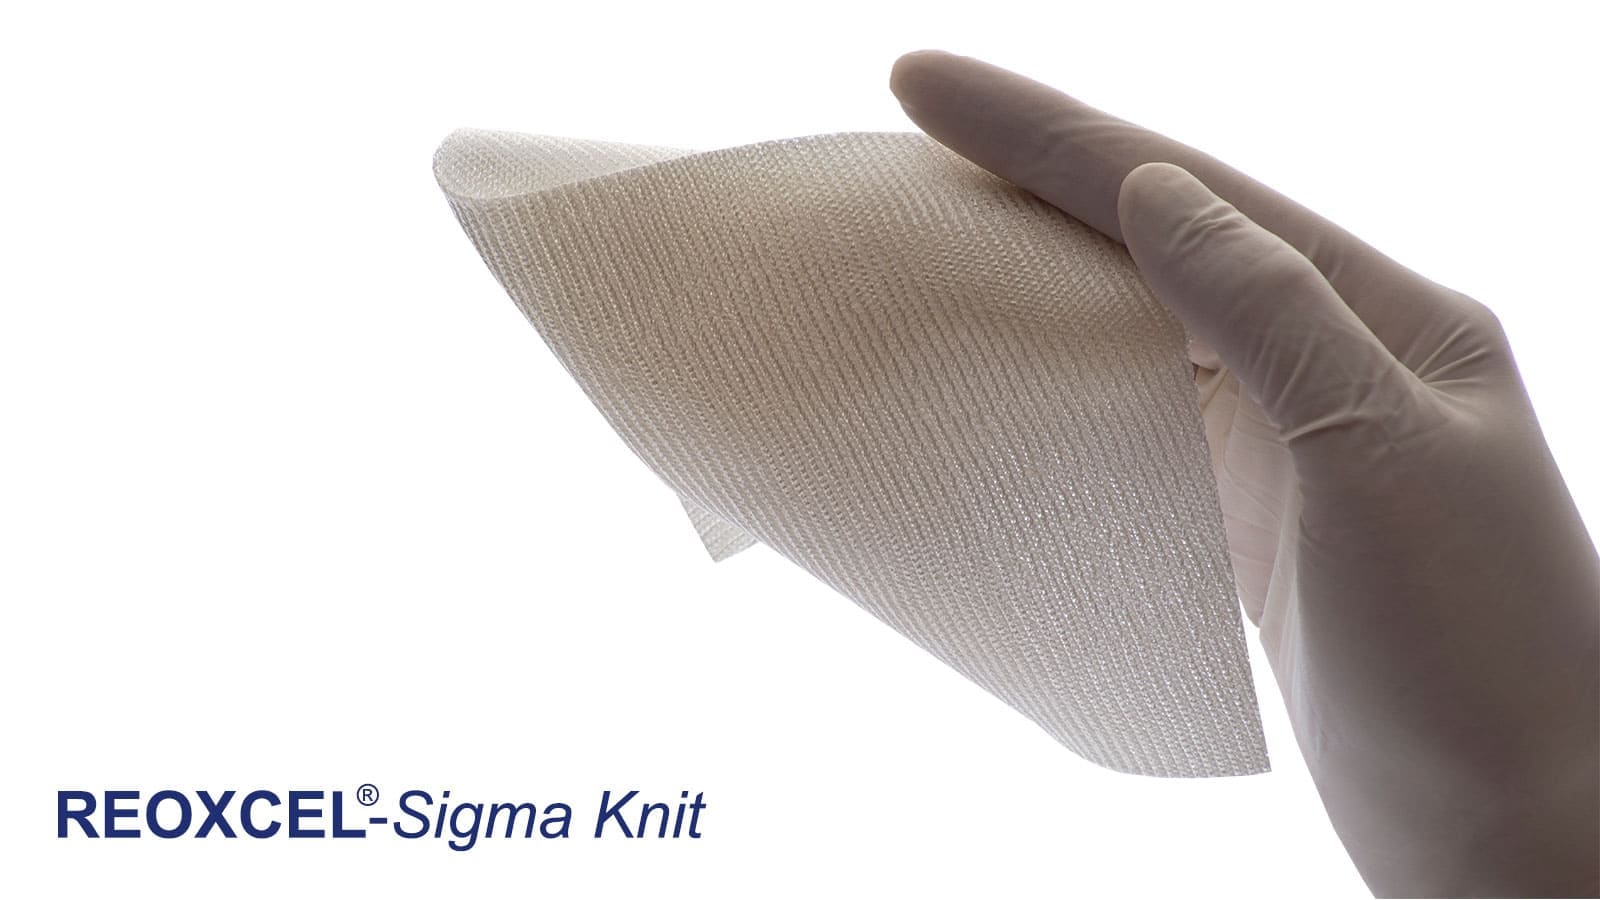 Reoxcel Sigma Knit absorbable haemostat with plain texture and thick knitting can be laid, pressed or sutured on bleeding surfaces.